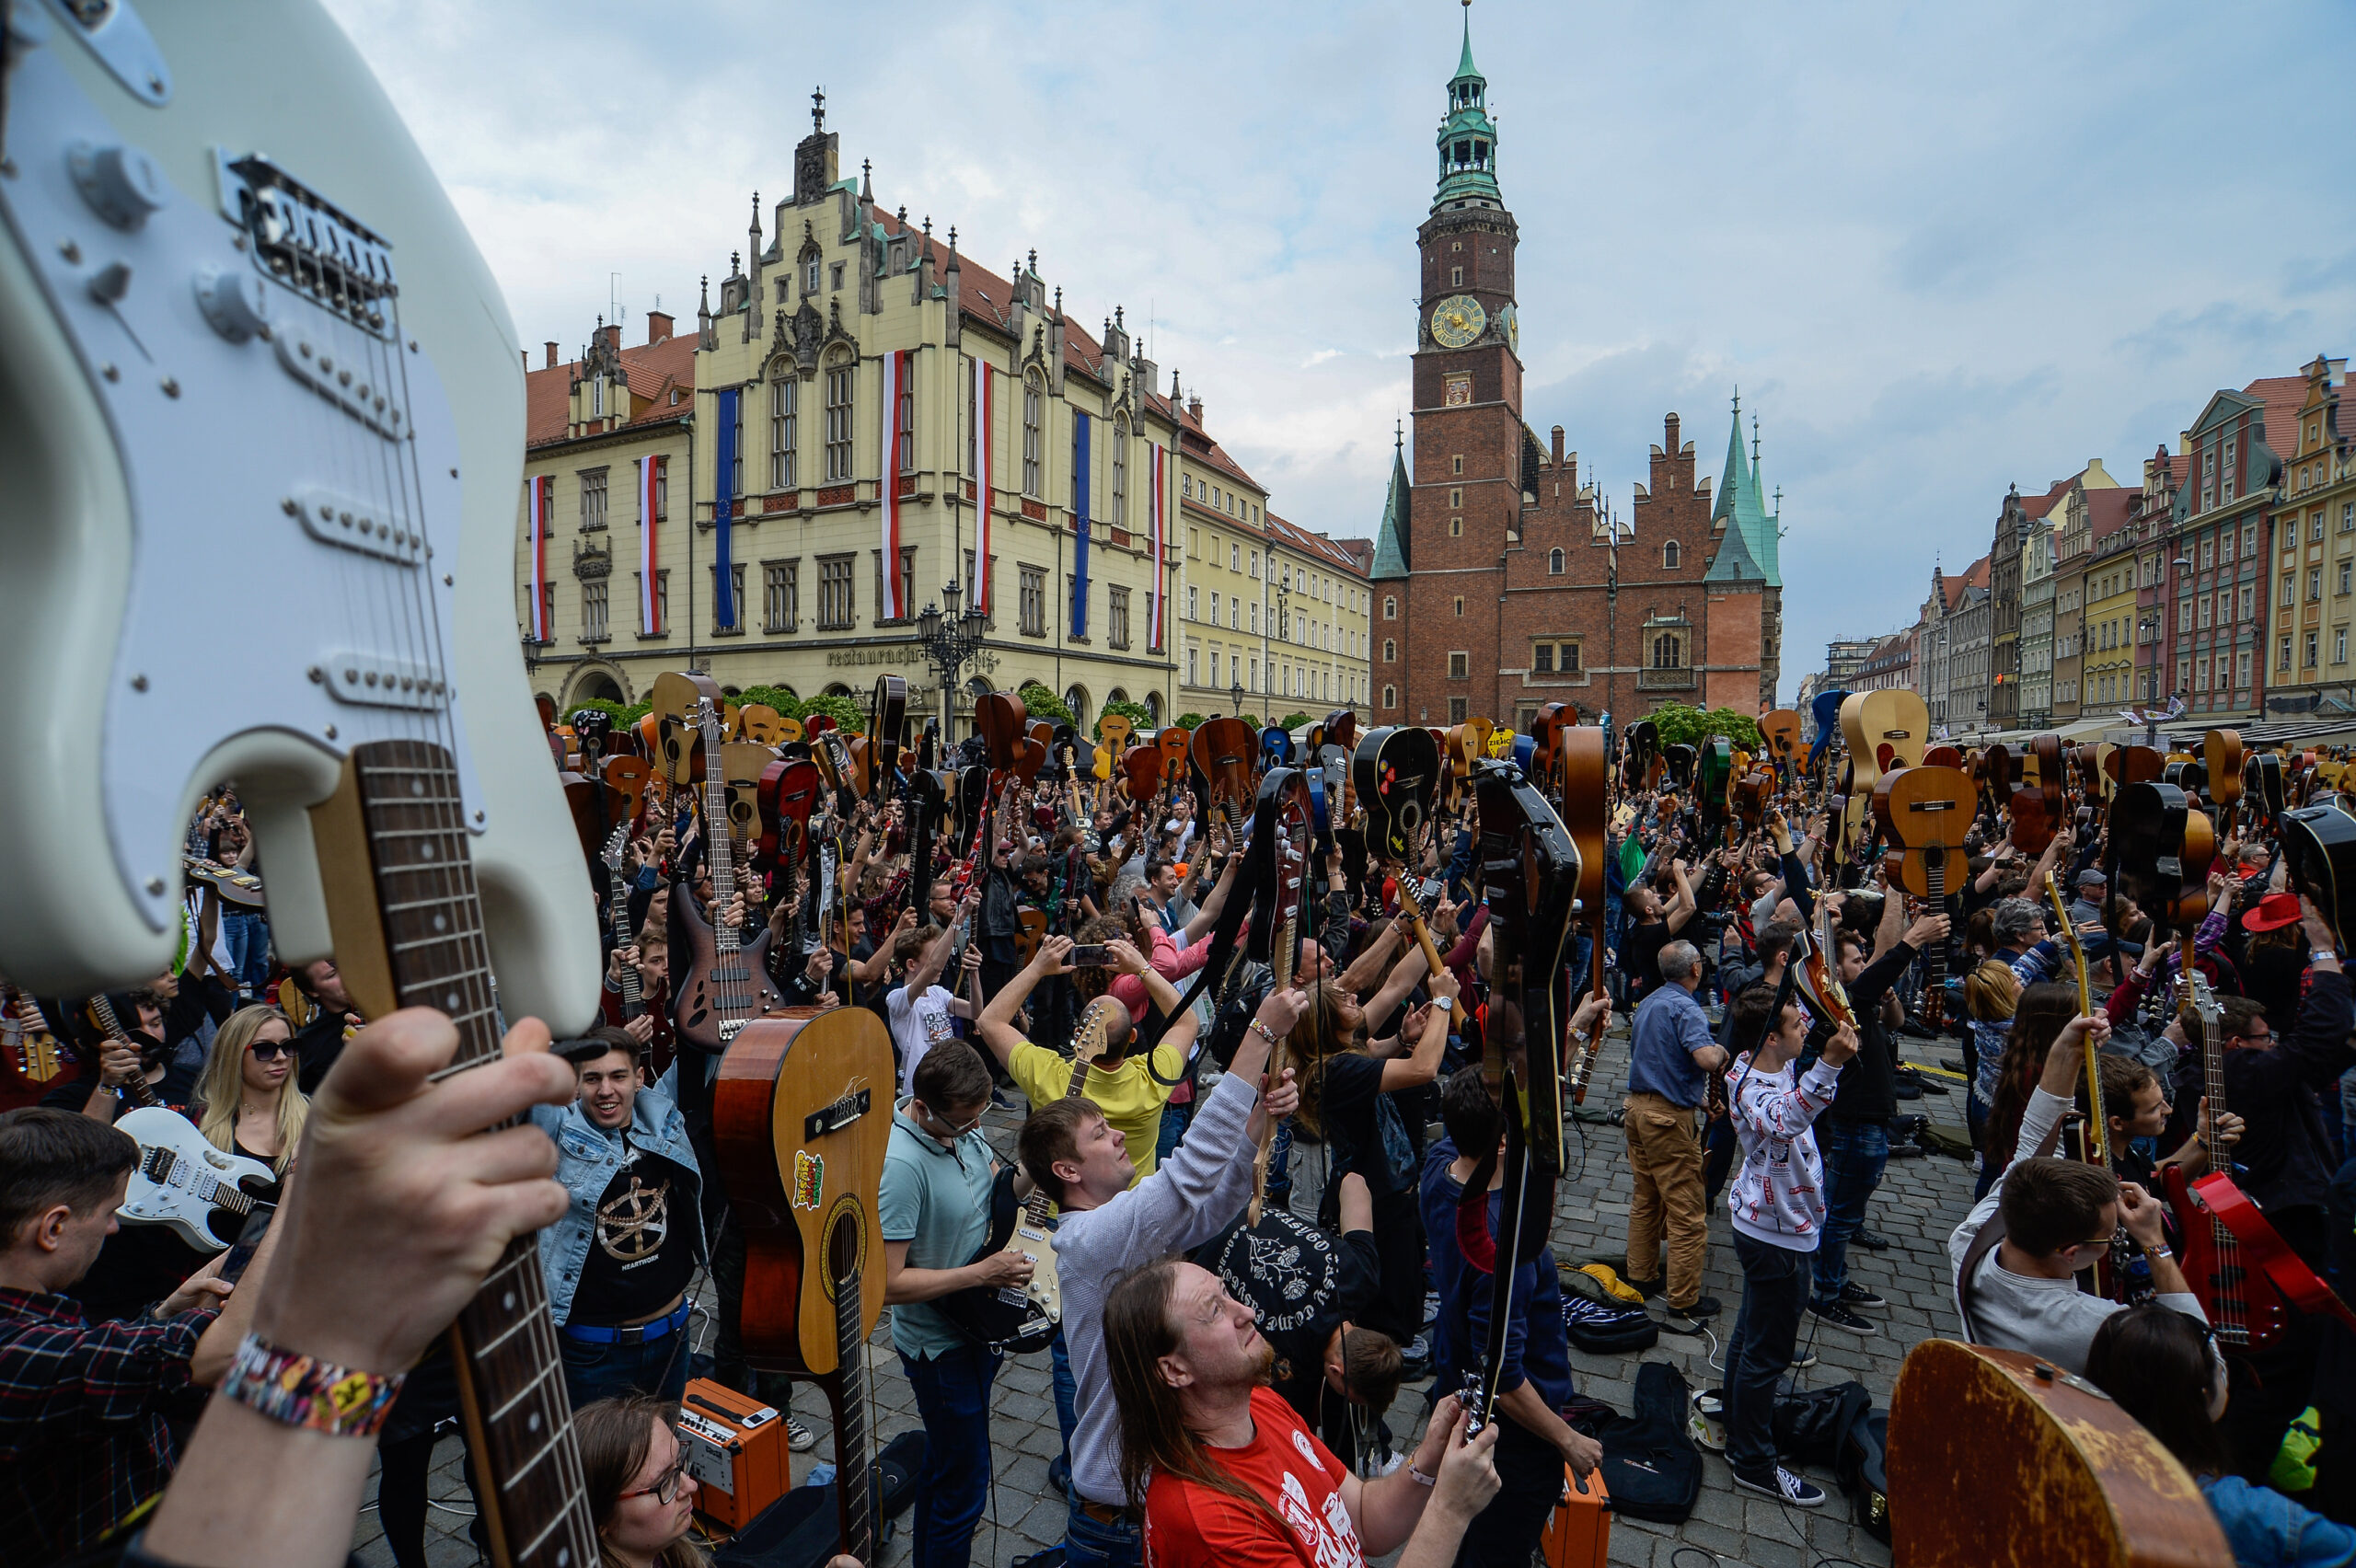 WROCLAW, POLAND - 2019/05/01: A mass gathering of guitarists seen attempting to beat the Guinness record for ensemble guitar playing at the Main Square. According to the organizer, reports say 7243 musicians gathered in Wroclaw Market Square to play Jimi Hendrix's hit 'Hey Joe'. (Photo by Omar Marques/SOPA Images/LightRocket via Getty Images)